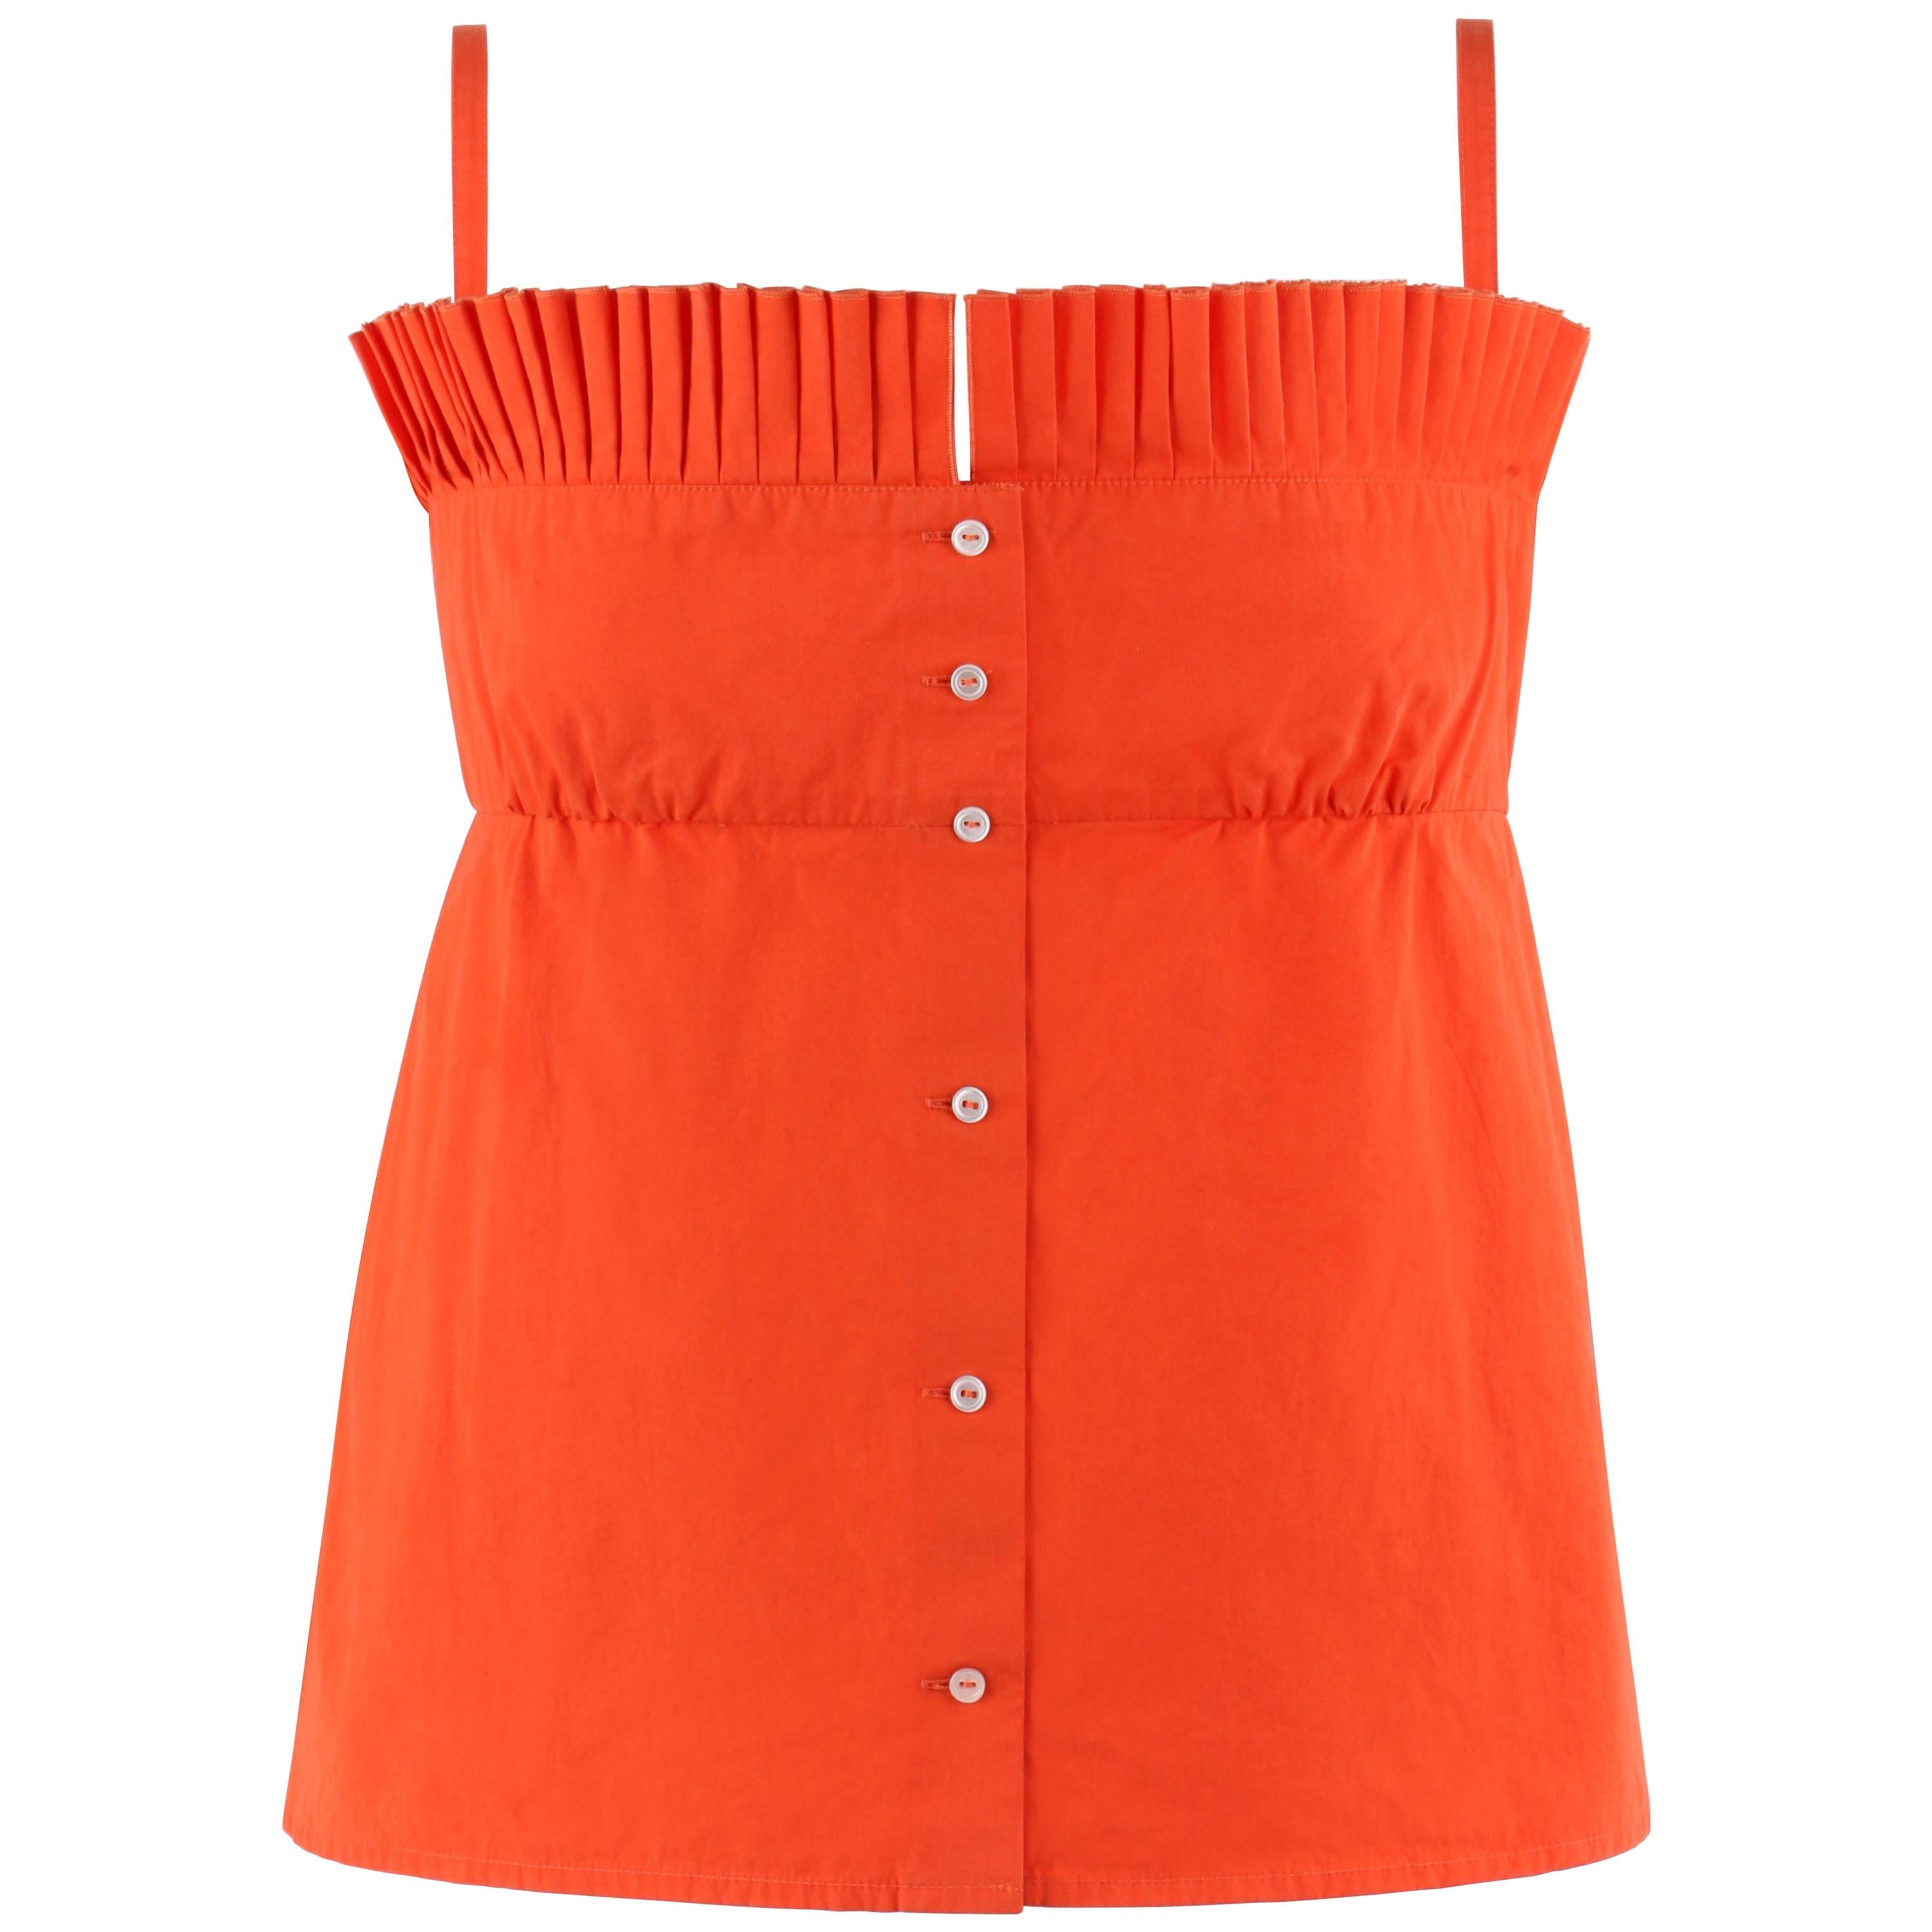 LOUIS VUITTON S/S 2003 Orange Knife Pleated Button Down Tank Top For Sale